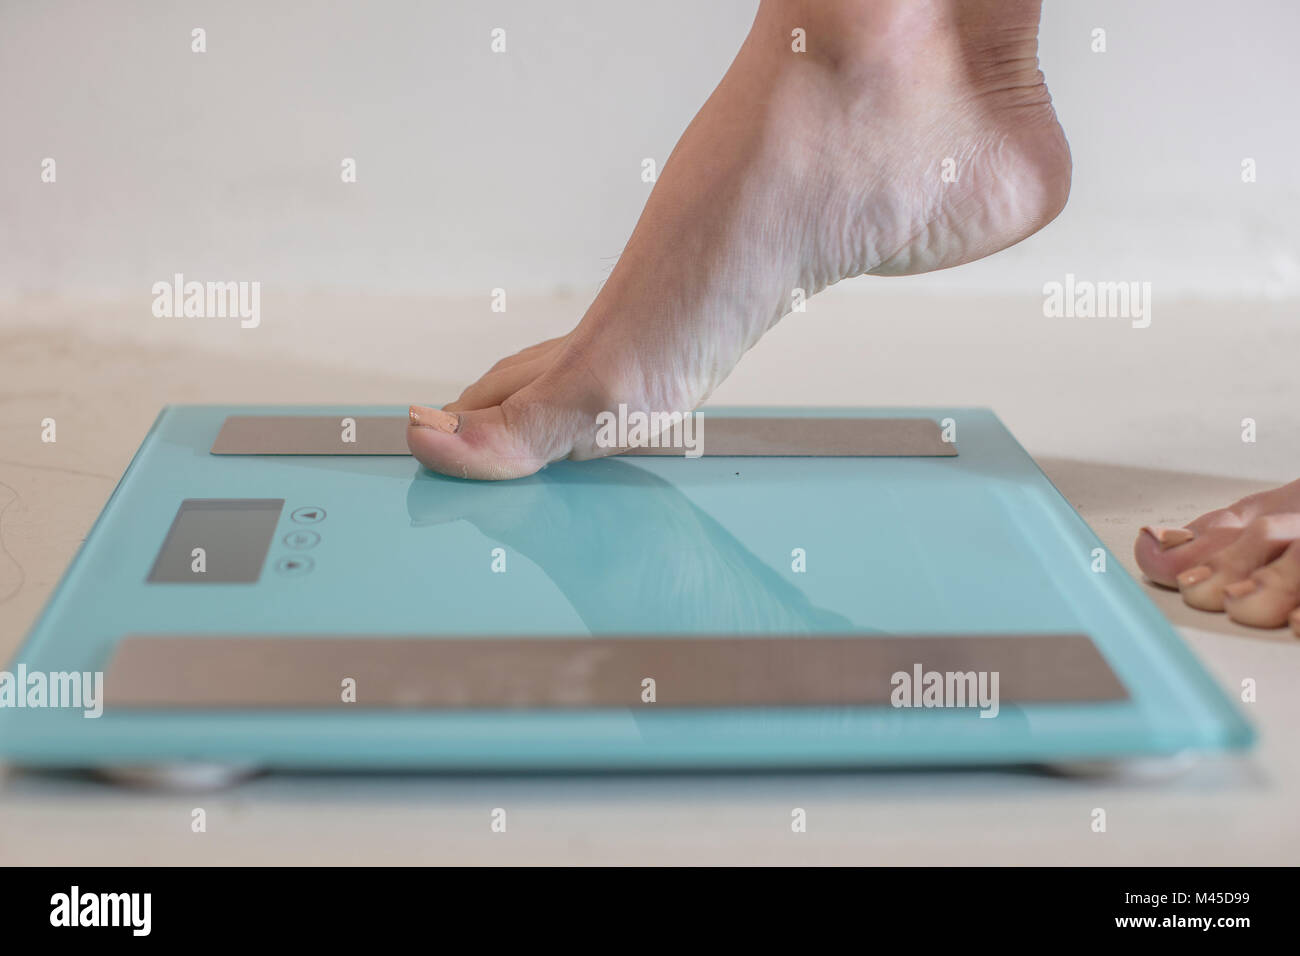 Young woman stepping onto weighing scales, close up of foot Stock Photo